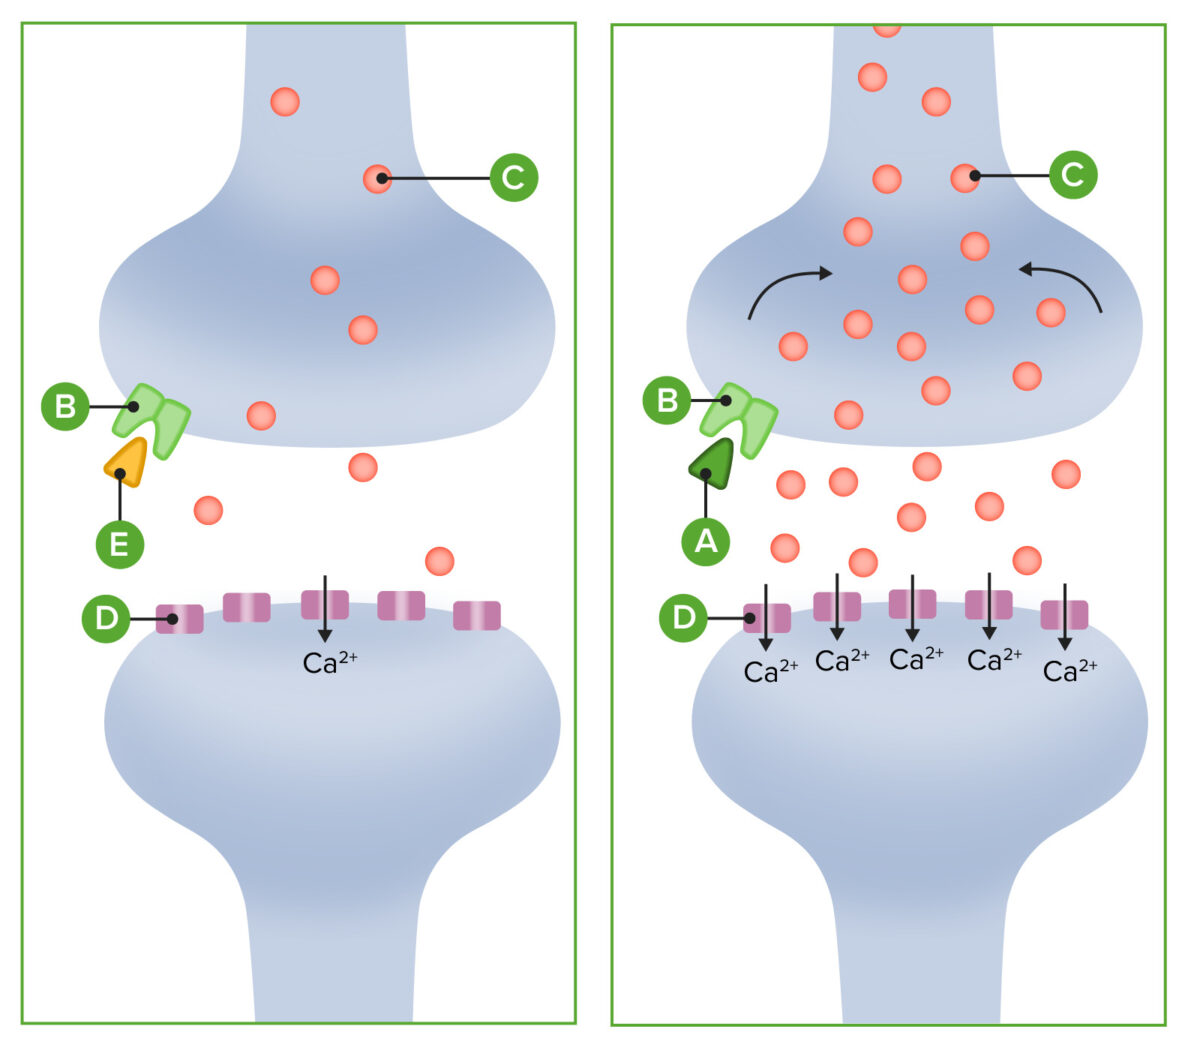 Cannabinoids form a connection with cannabinoid receptors